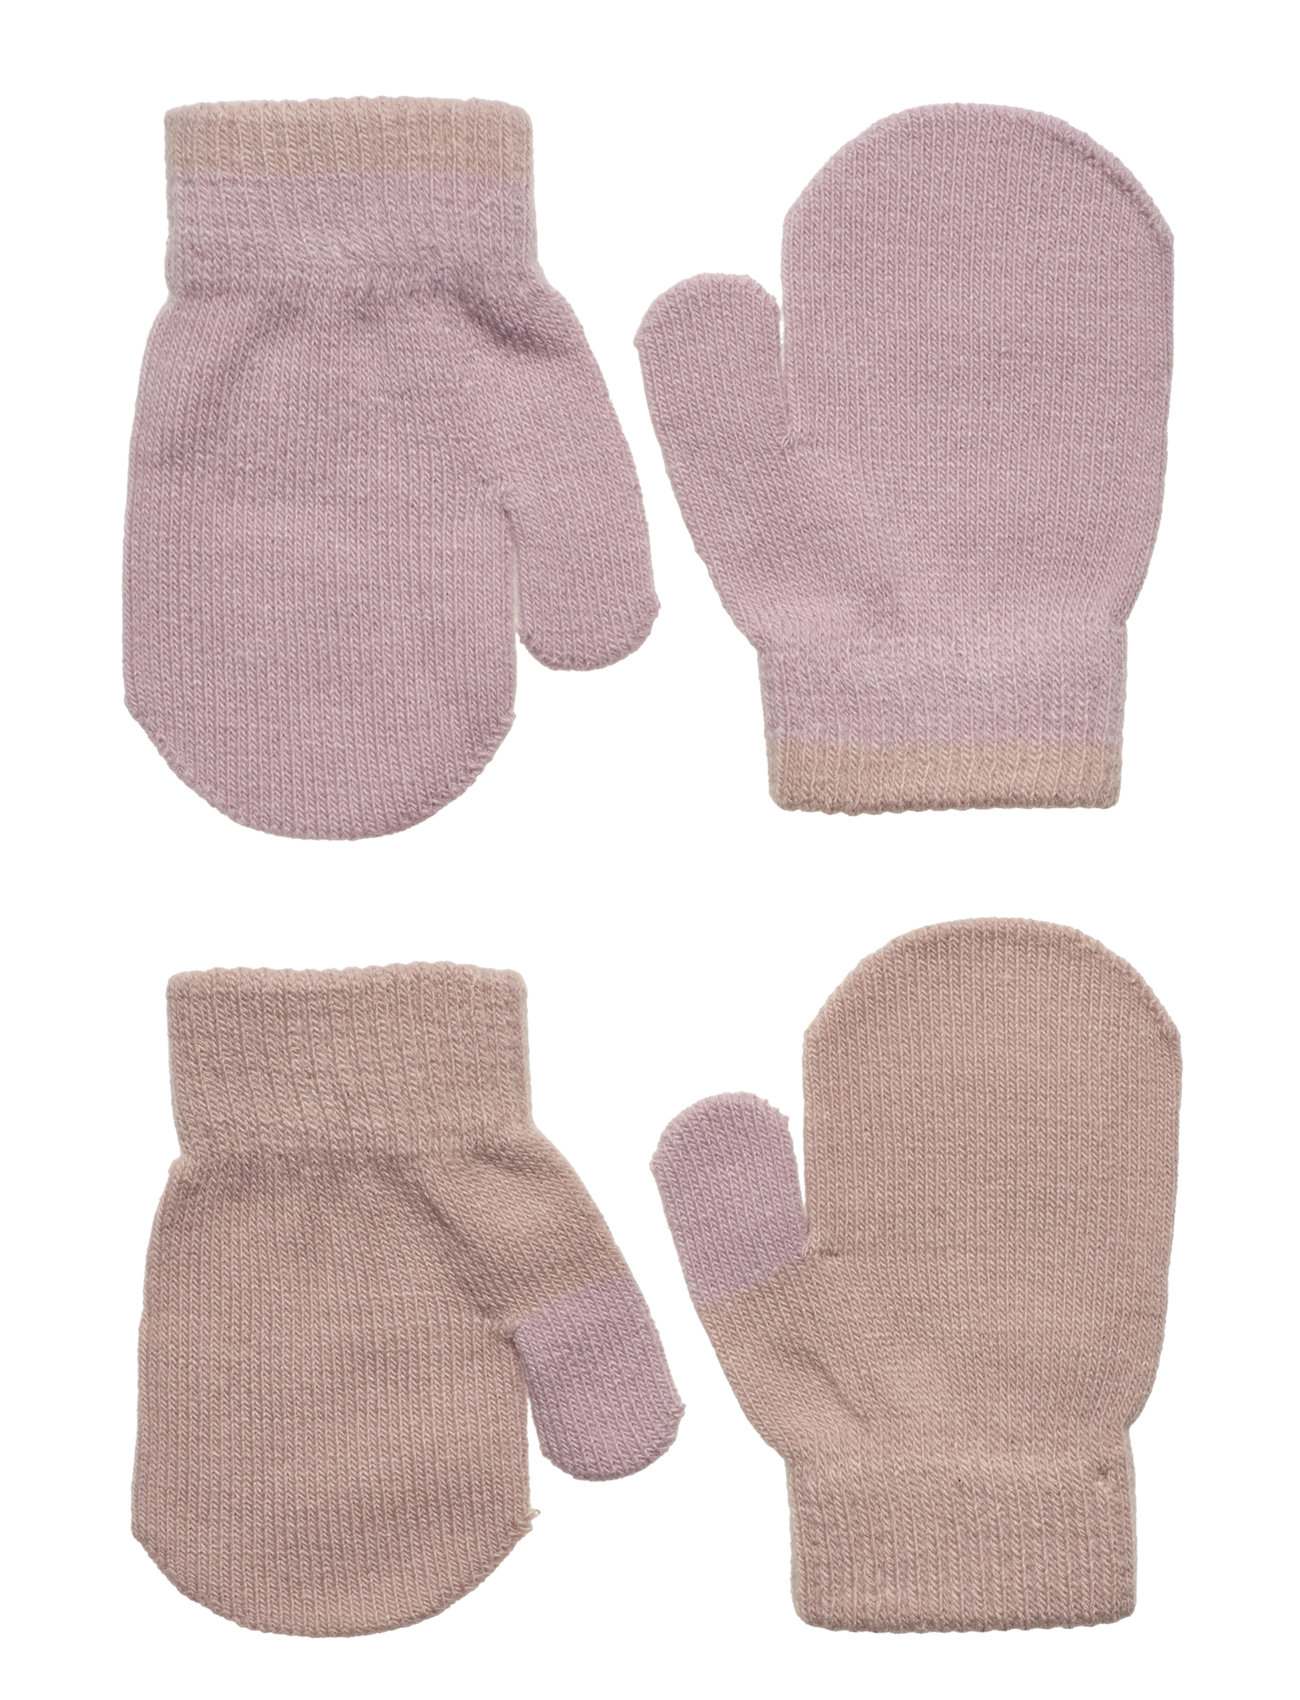 Kenny Accessories Gloves & Mittens Baby Gloves Multi/patterned Molo